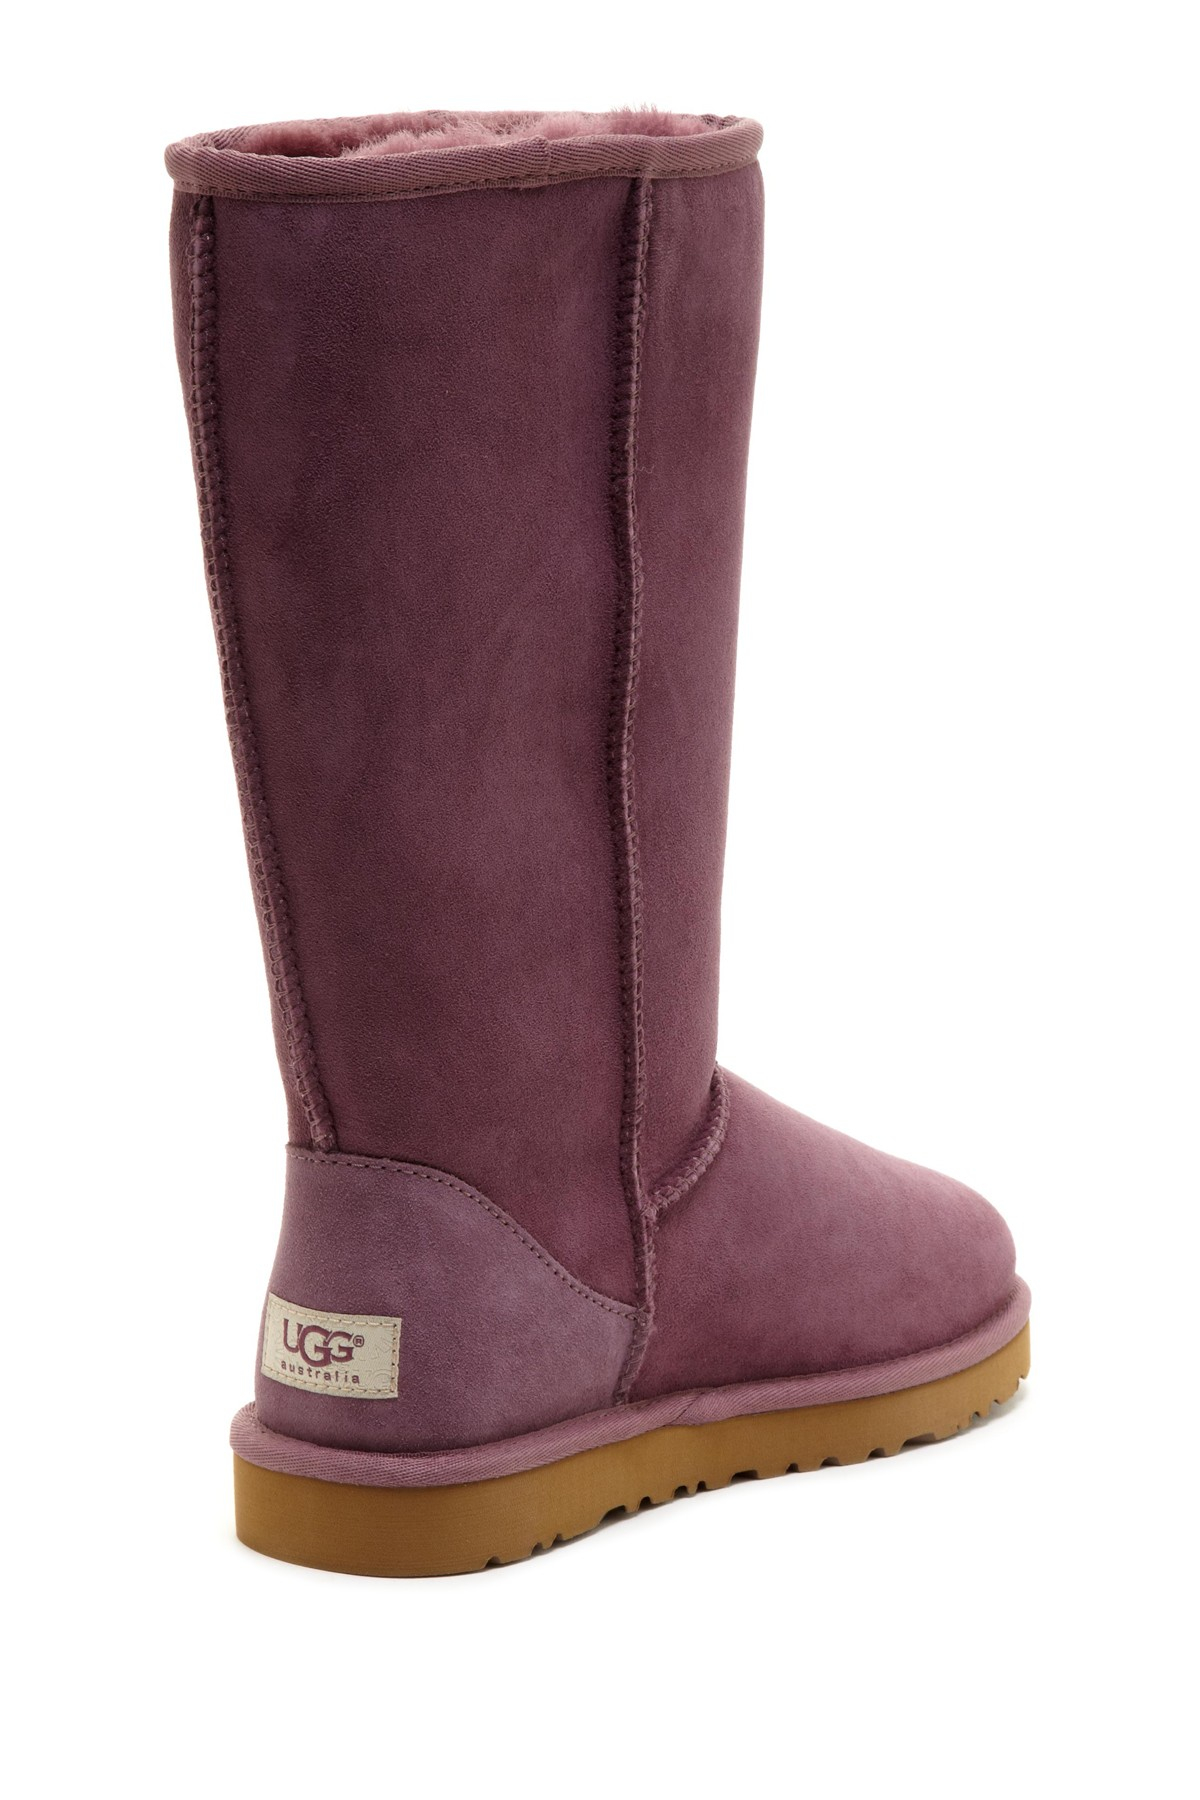 Lyst - Ugg Classic Genuine Shearling Tall Boot in Pink